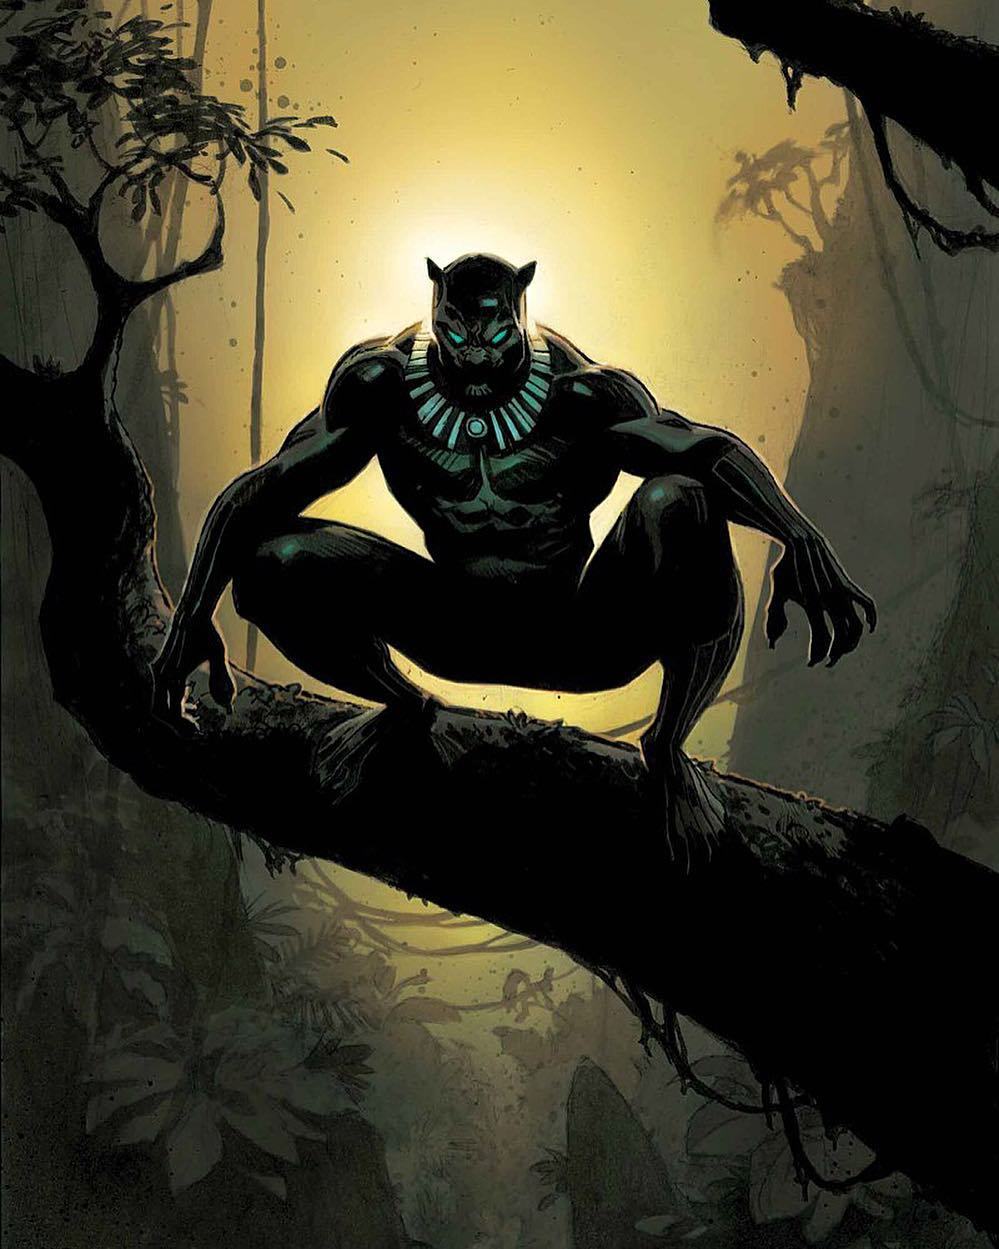 Black Panther, Vol. 1 by Ta-Nehisi Coates